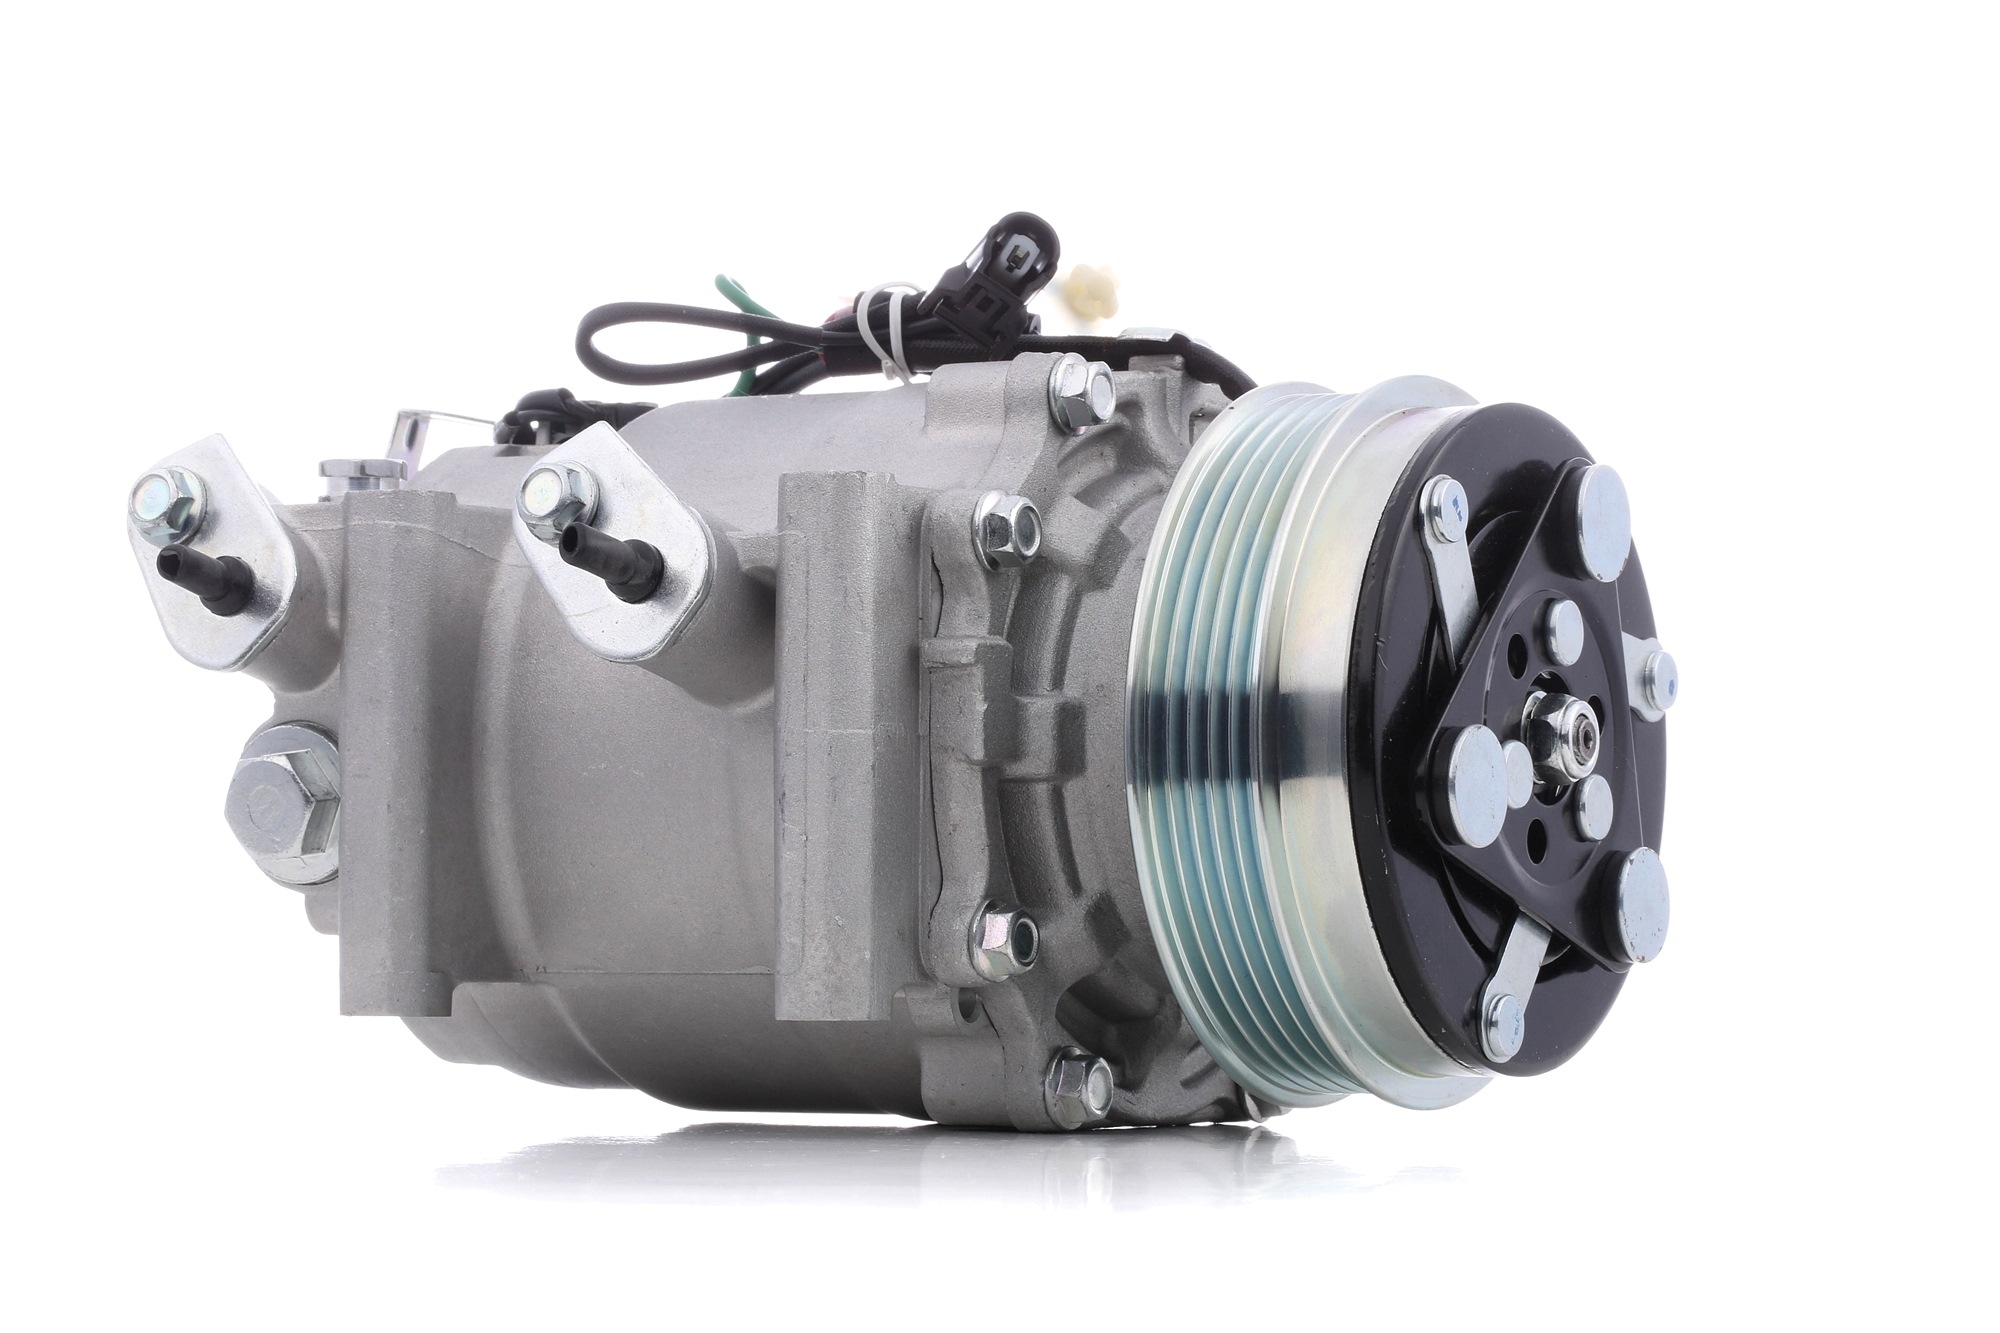 STARK SKKM-0340319 Air conditioning compressor HSK70, TRSE07, PAG 46, R 134a, with PAG compressor oil